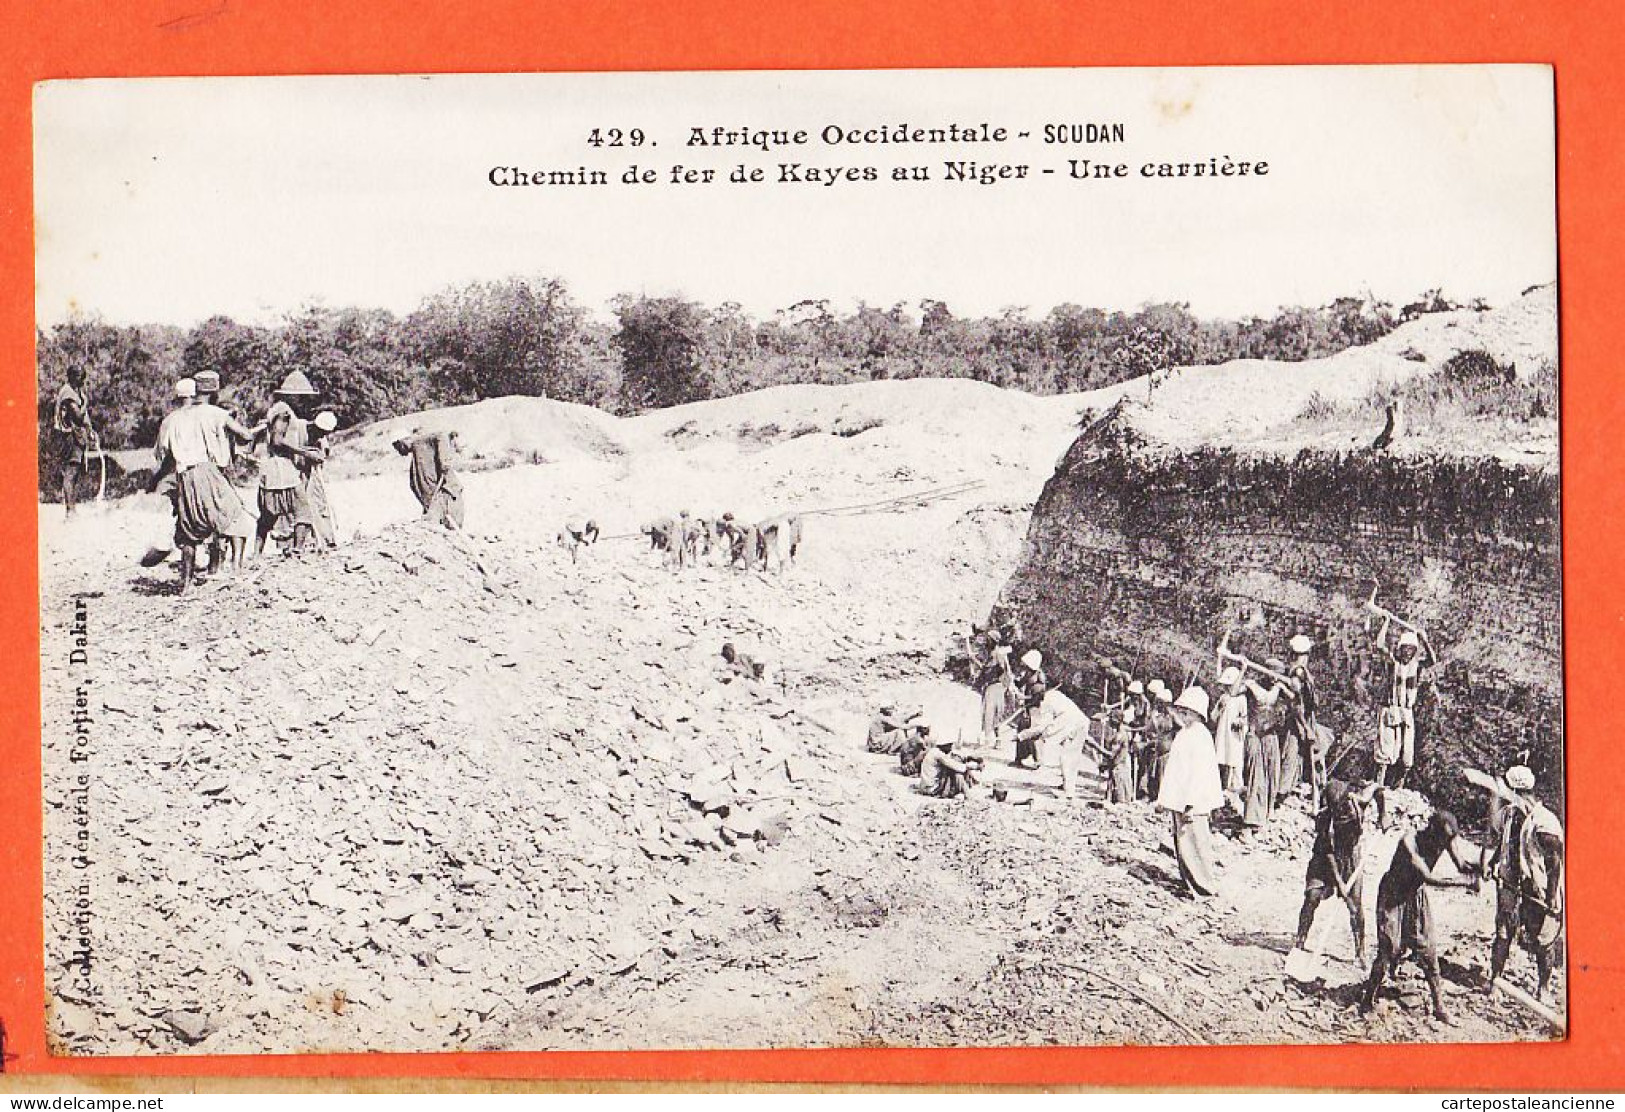 32995 / ⭐ (•◡•) Chemin Fer KAYES Au NIGER Soudan ◉ Une Carriere 1905s ◉ Collection Generale FORTIER 429 Dakar A.O.F - Sudan